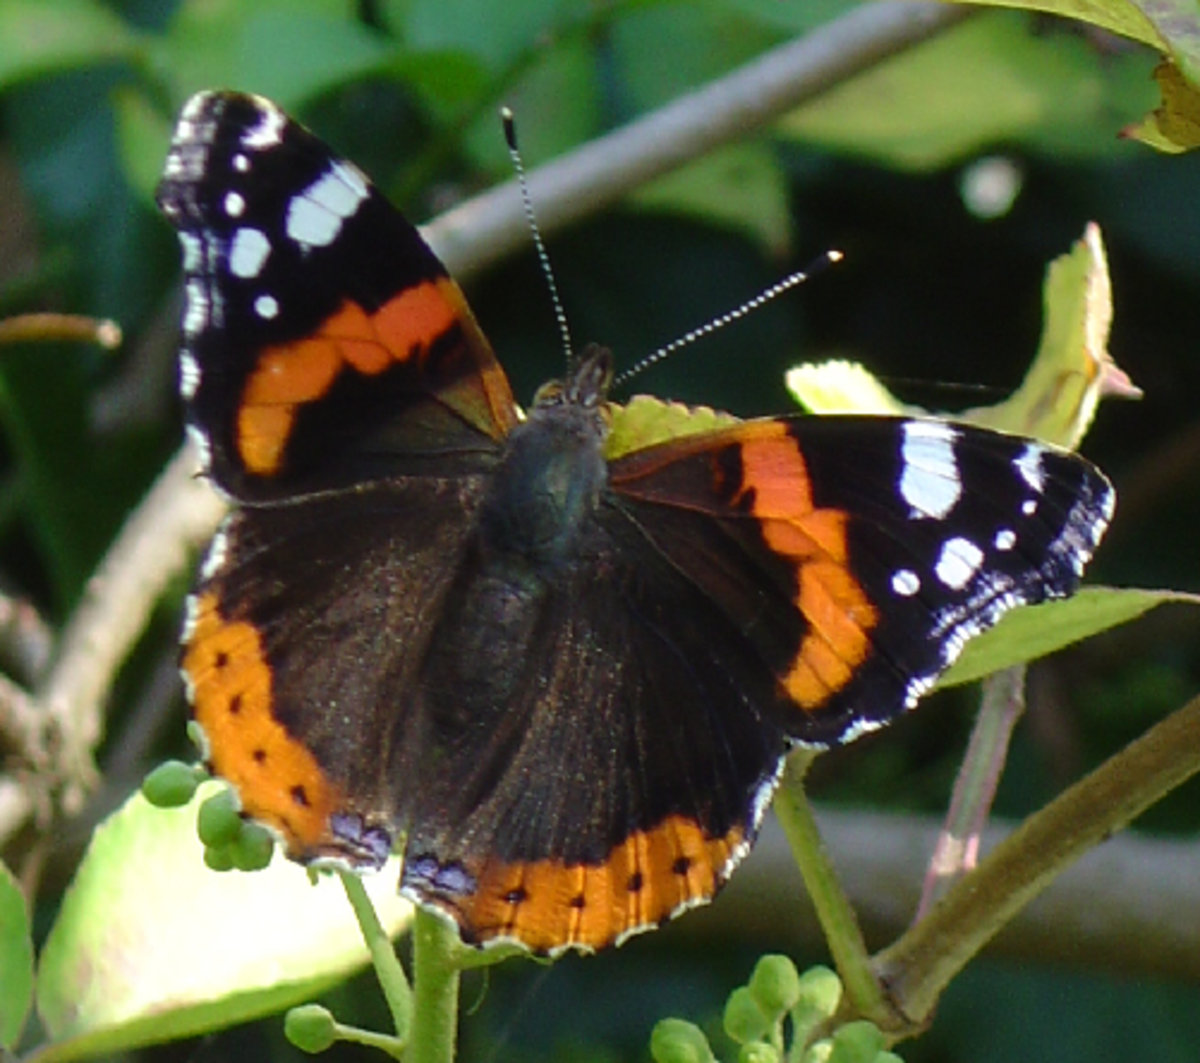 Orange and Black Butterfly